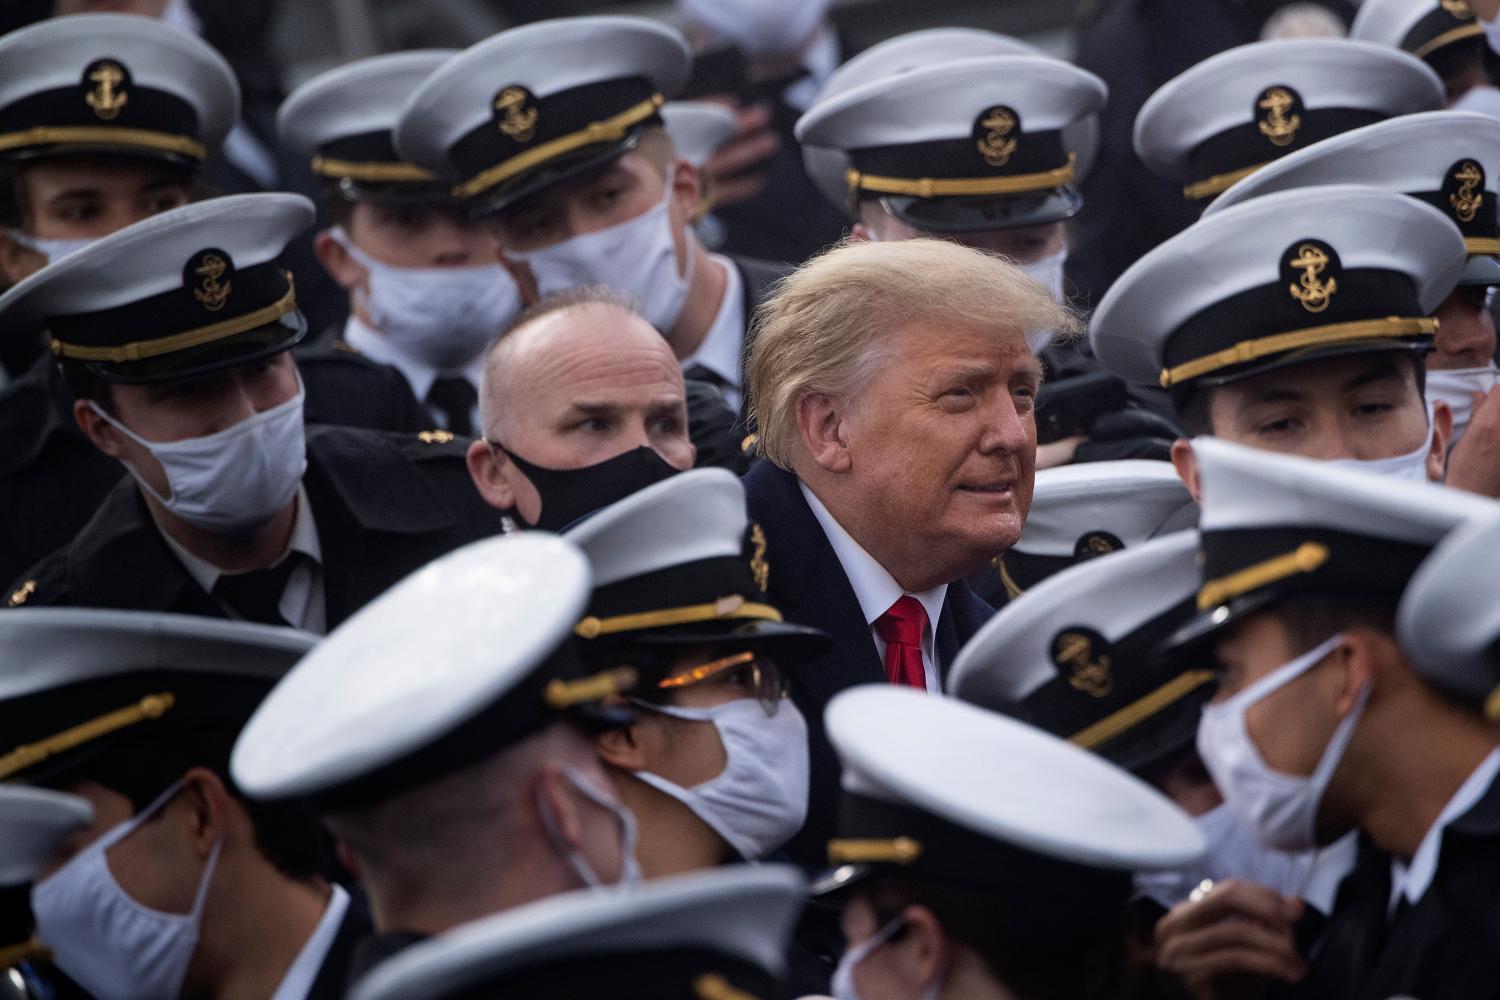 US President Donald Trump joins Naval Academy cadets during the Army-Navy football game at Michie Stadium on 12 December 2020 in West Point, New York. (Photo by Brendan Smialowski/AFP via Getty Images)